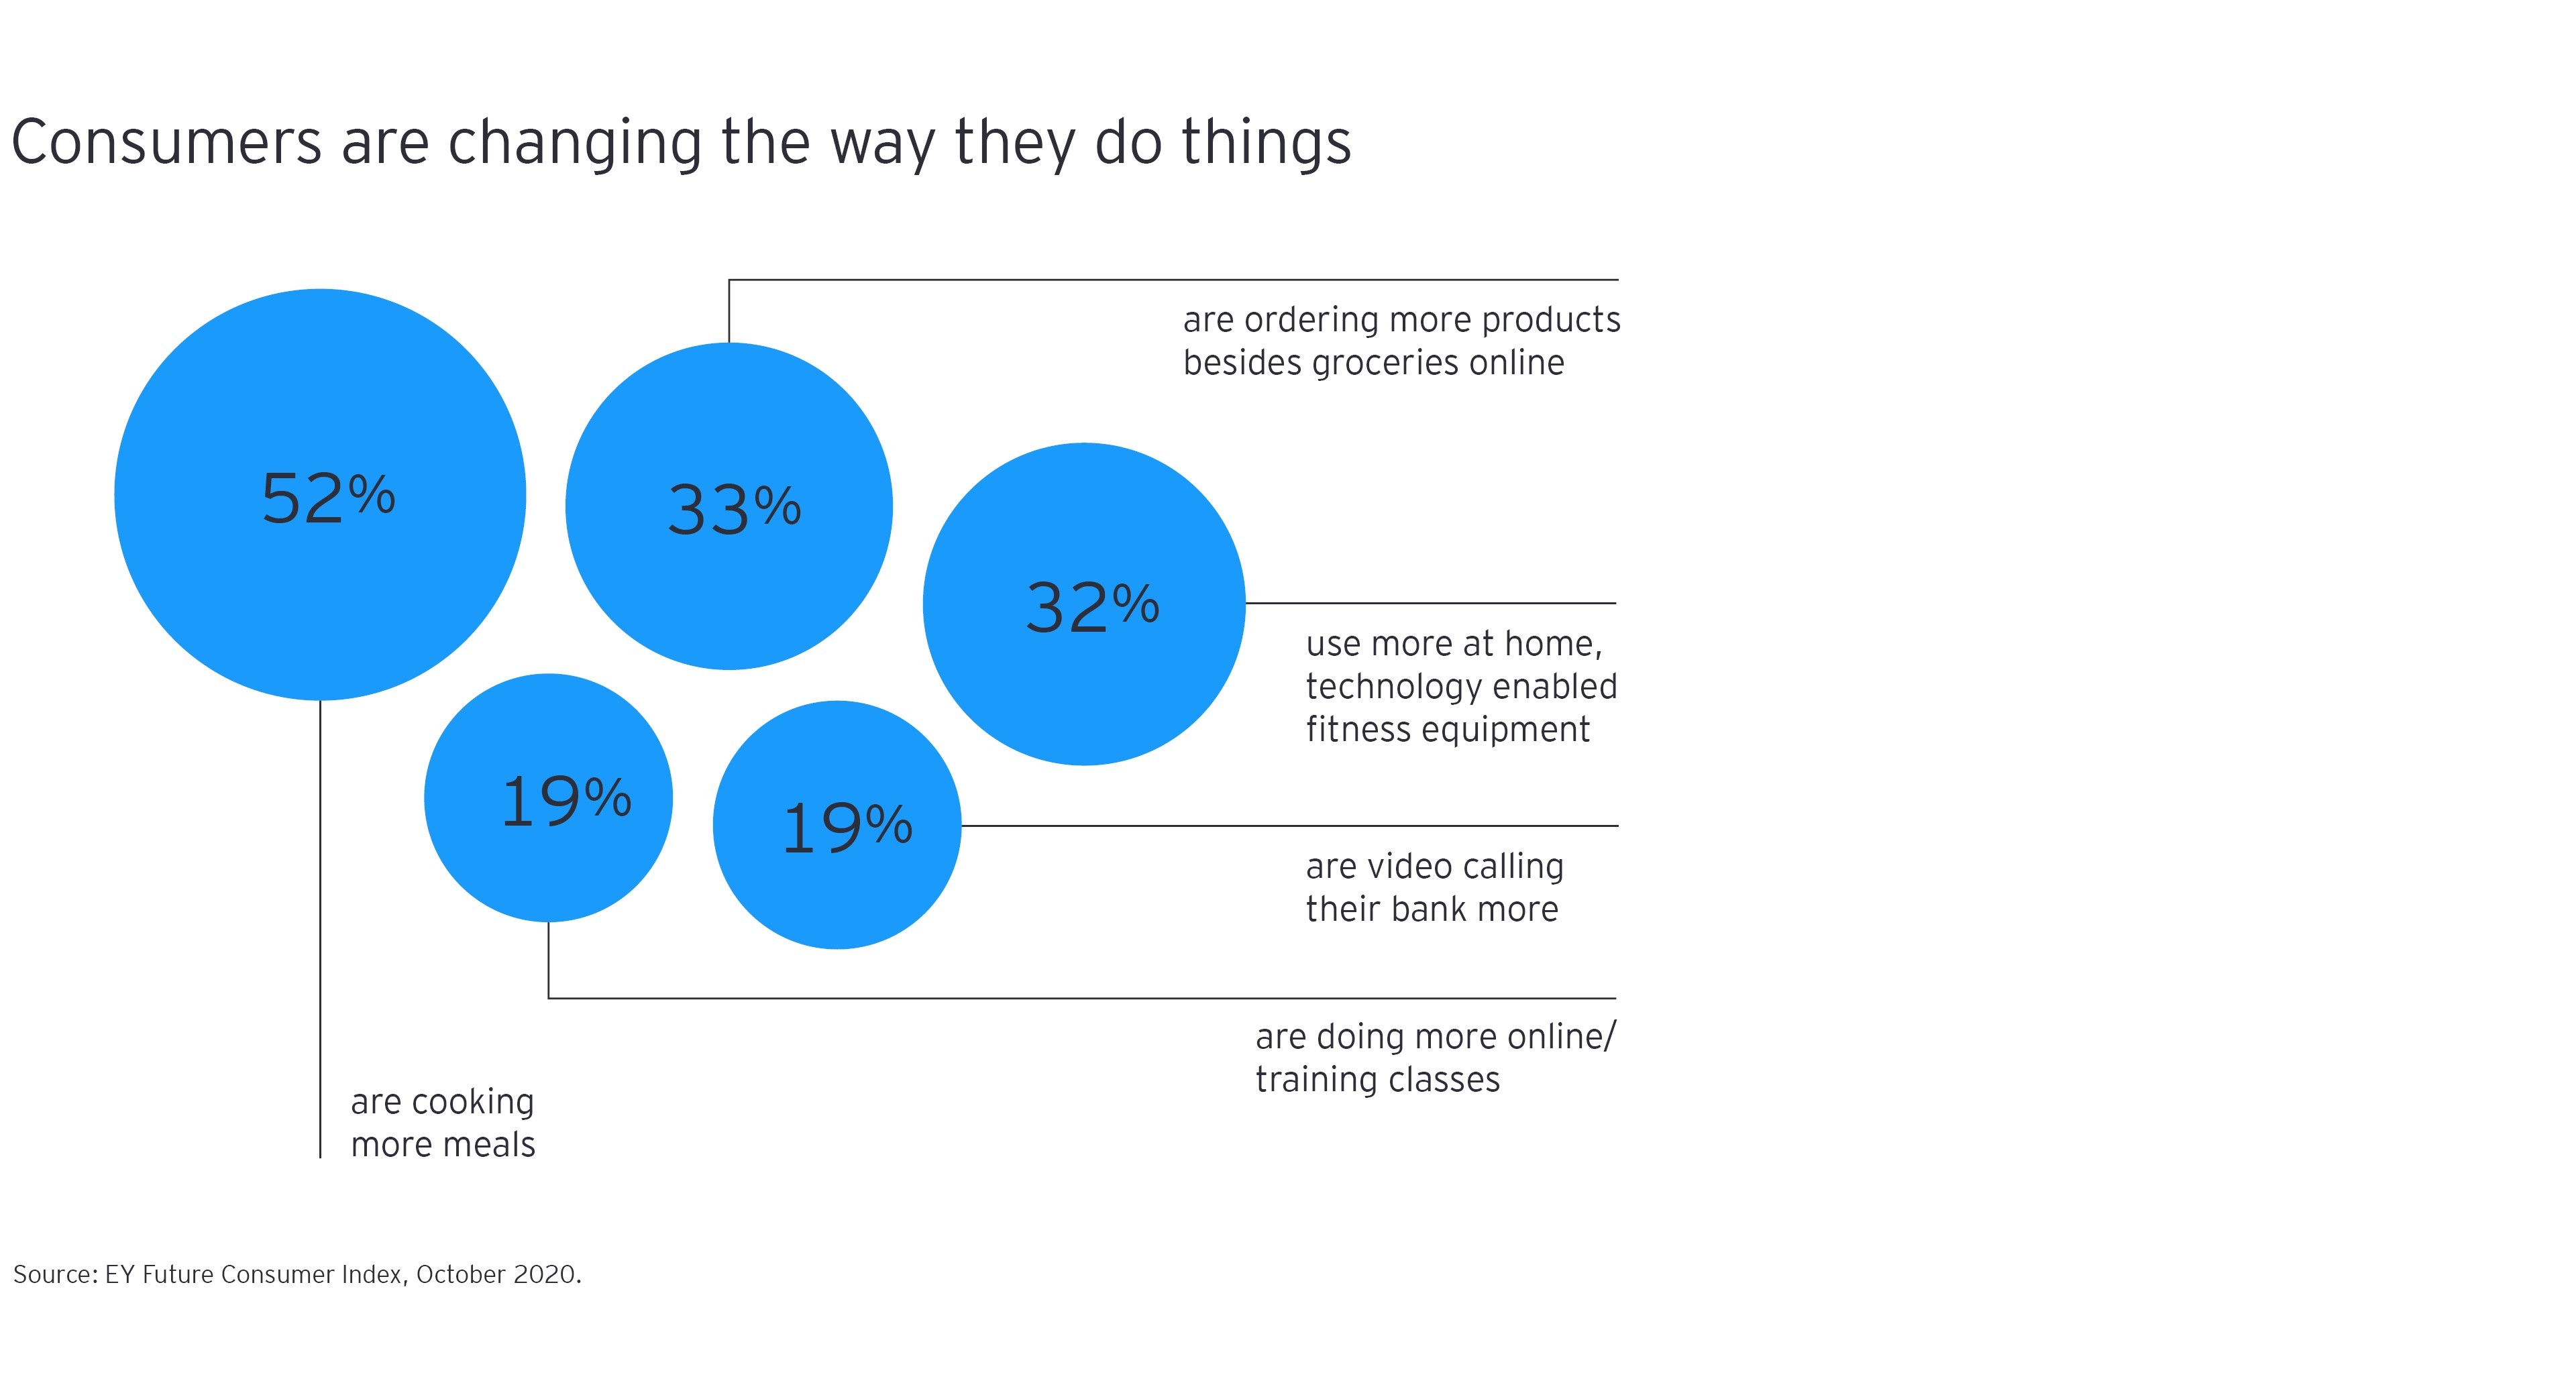 Consumers are changing the way they do things